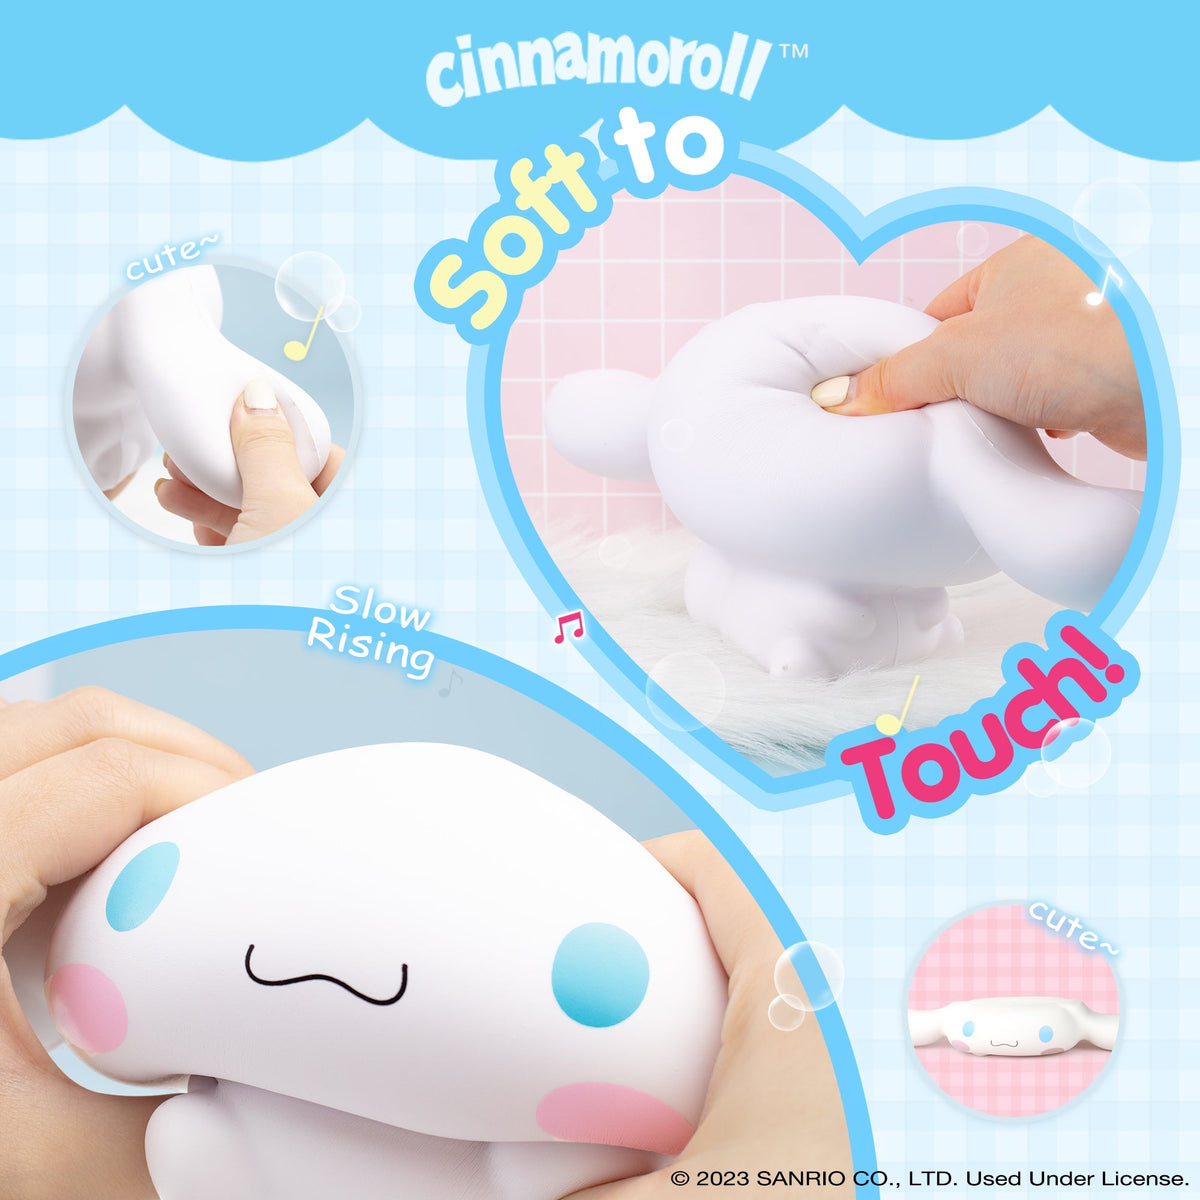 New Squishies have Arrived! Slow Rise and Scented! – JapanLA